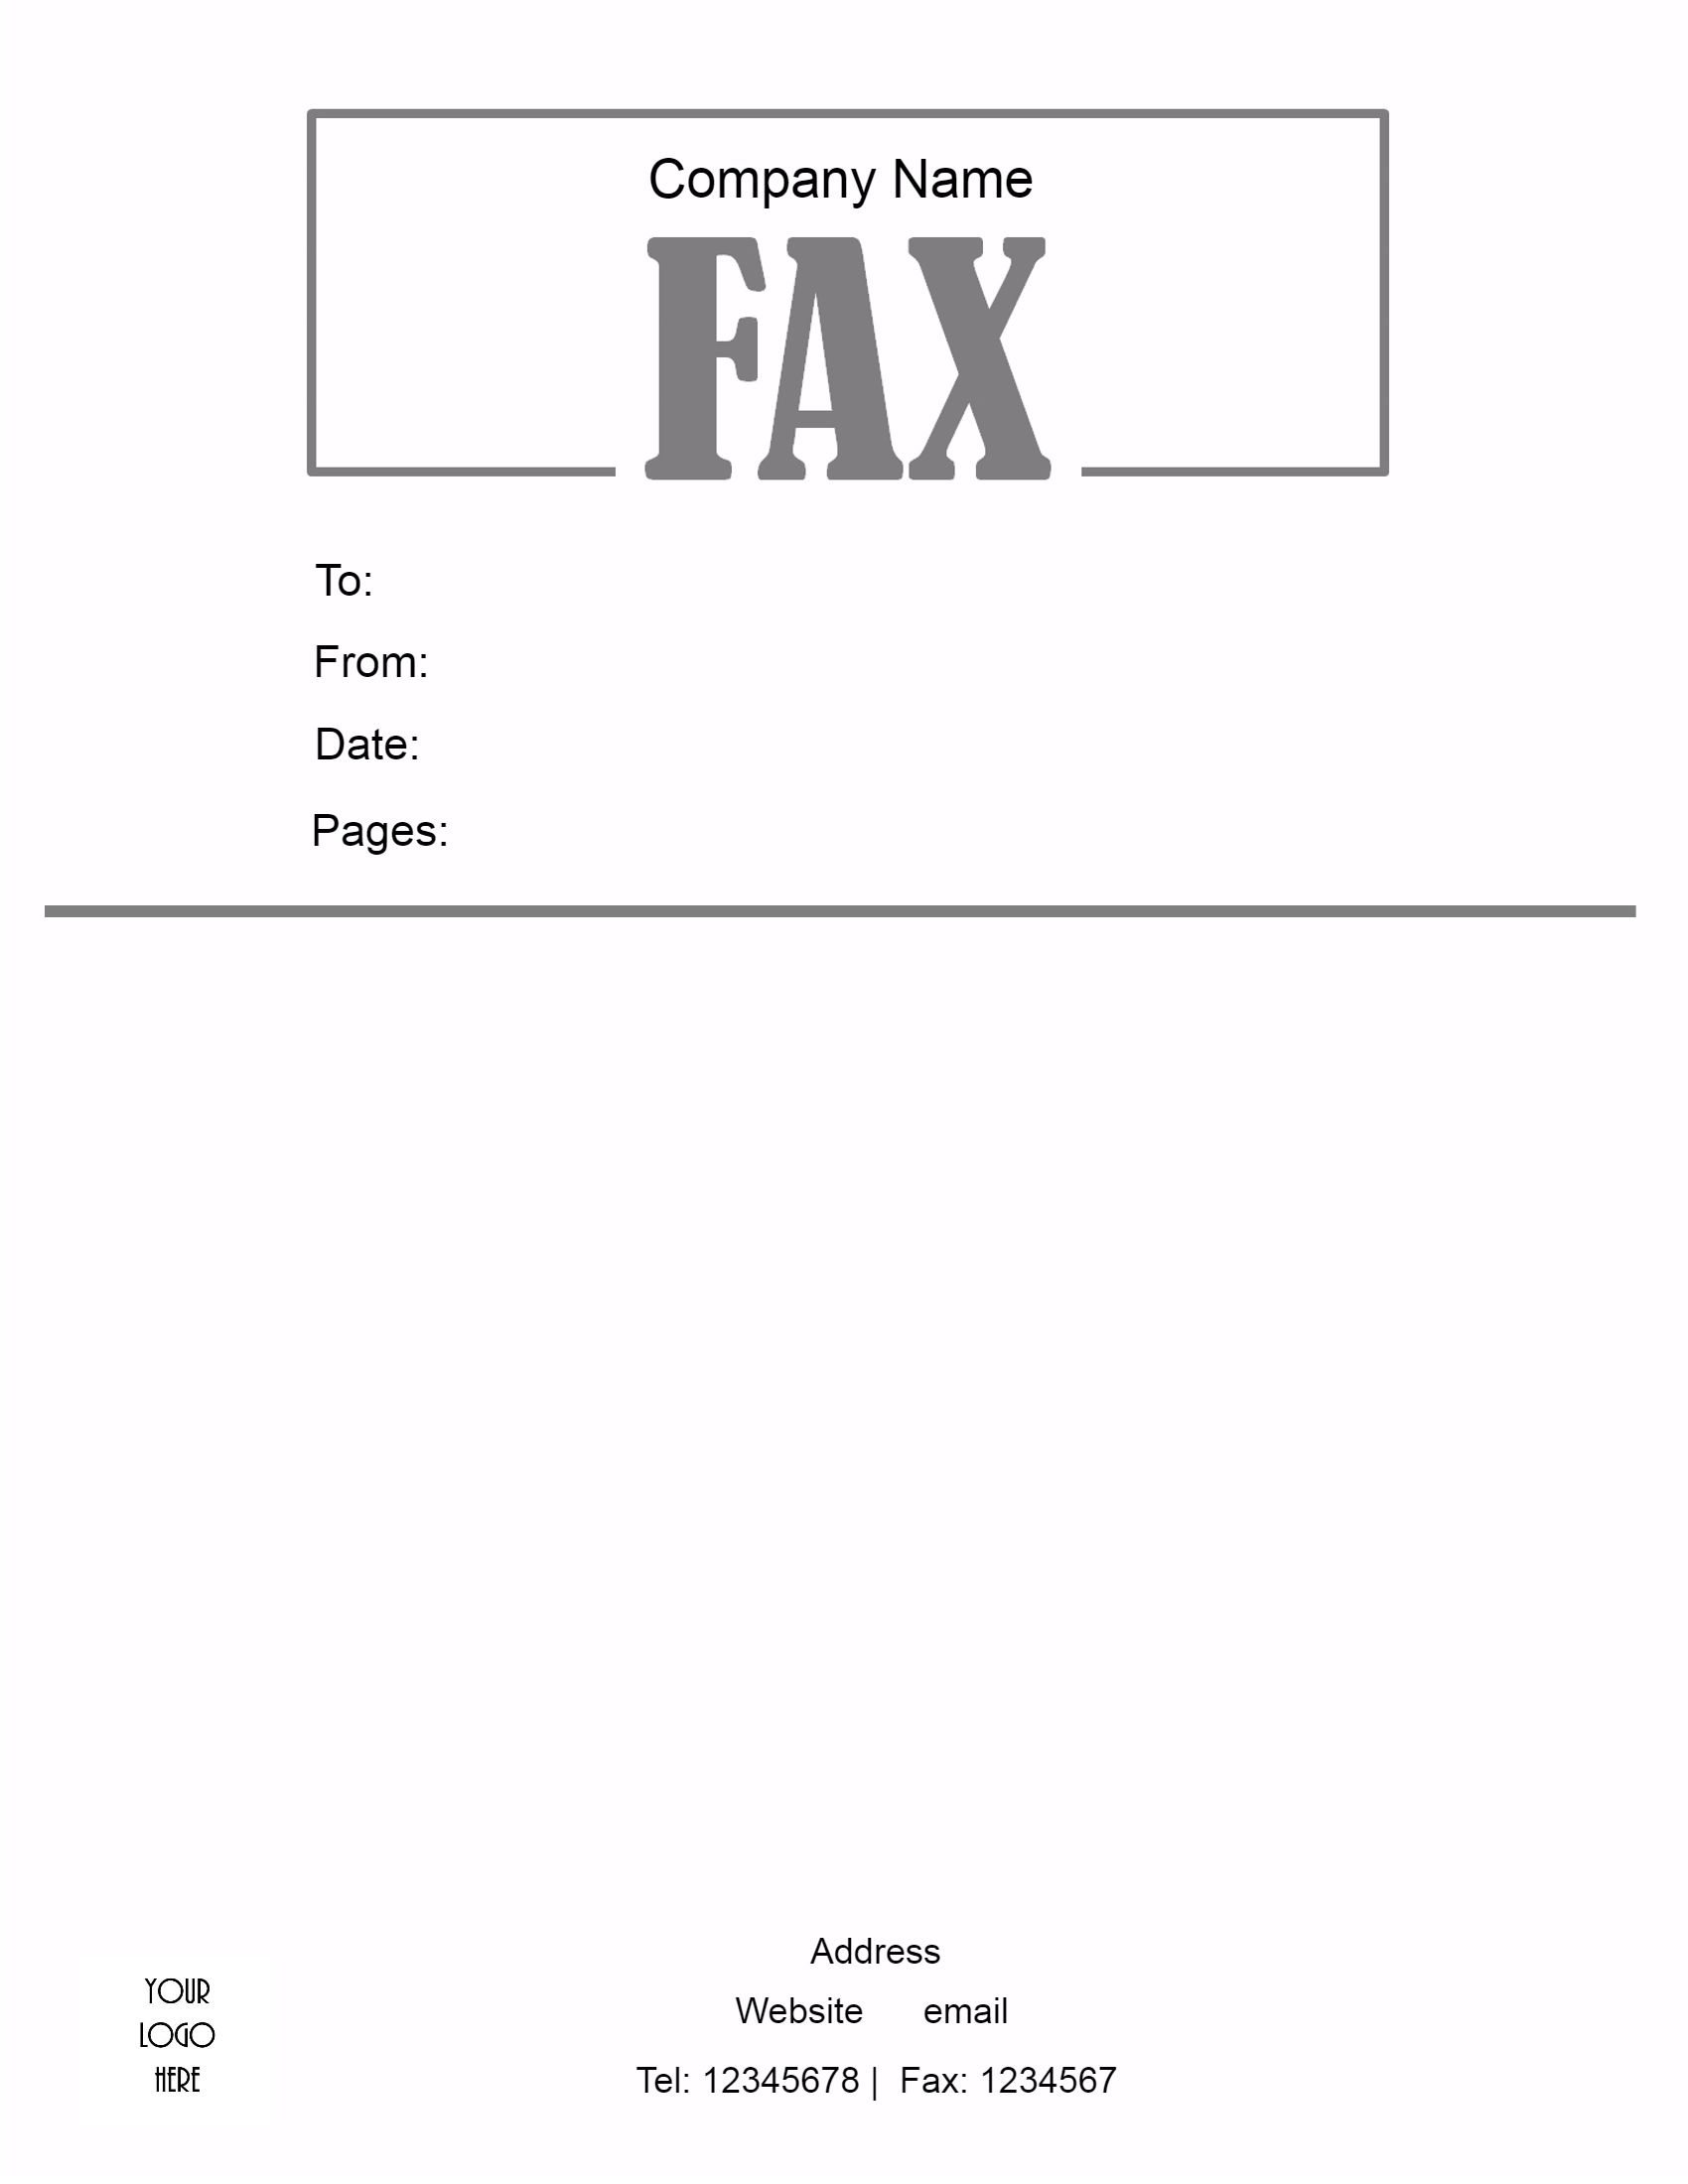 fax cover sheets printable free